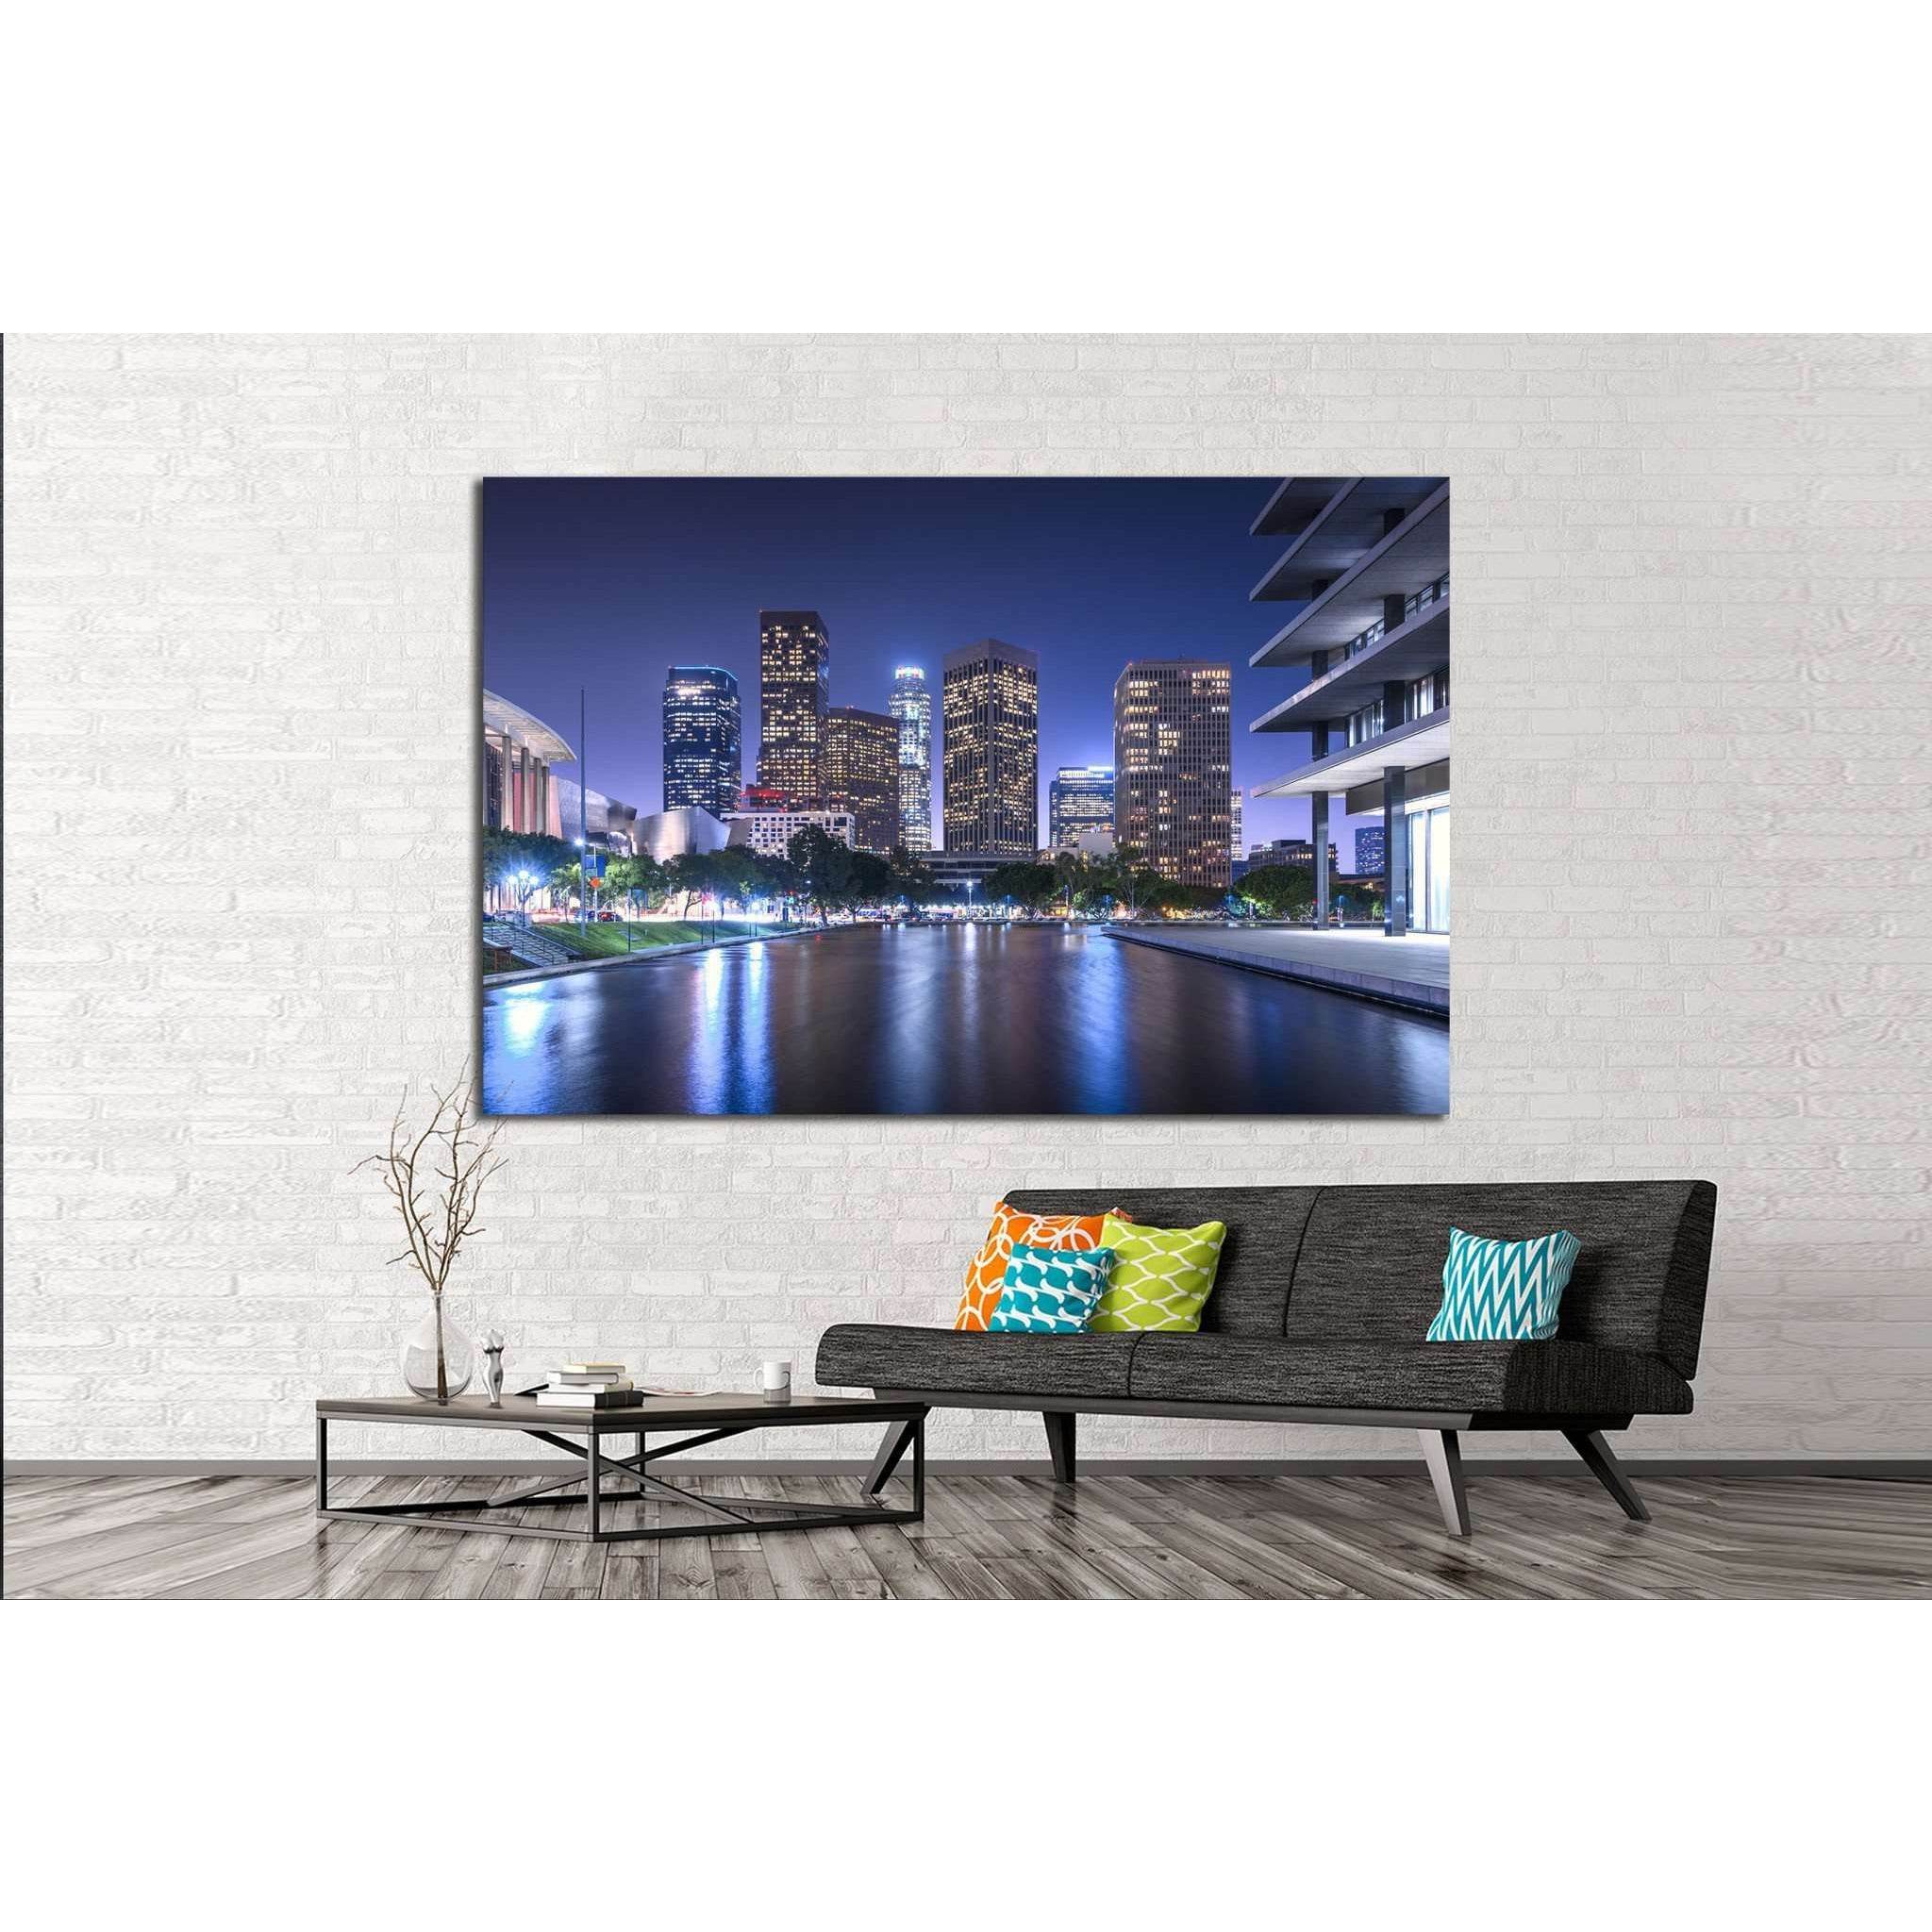 Skyscrapers Los Angeles California at night №1268 Ready to Hang Canvas Print